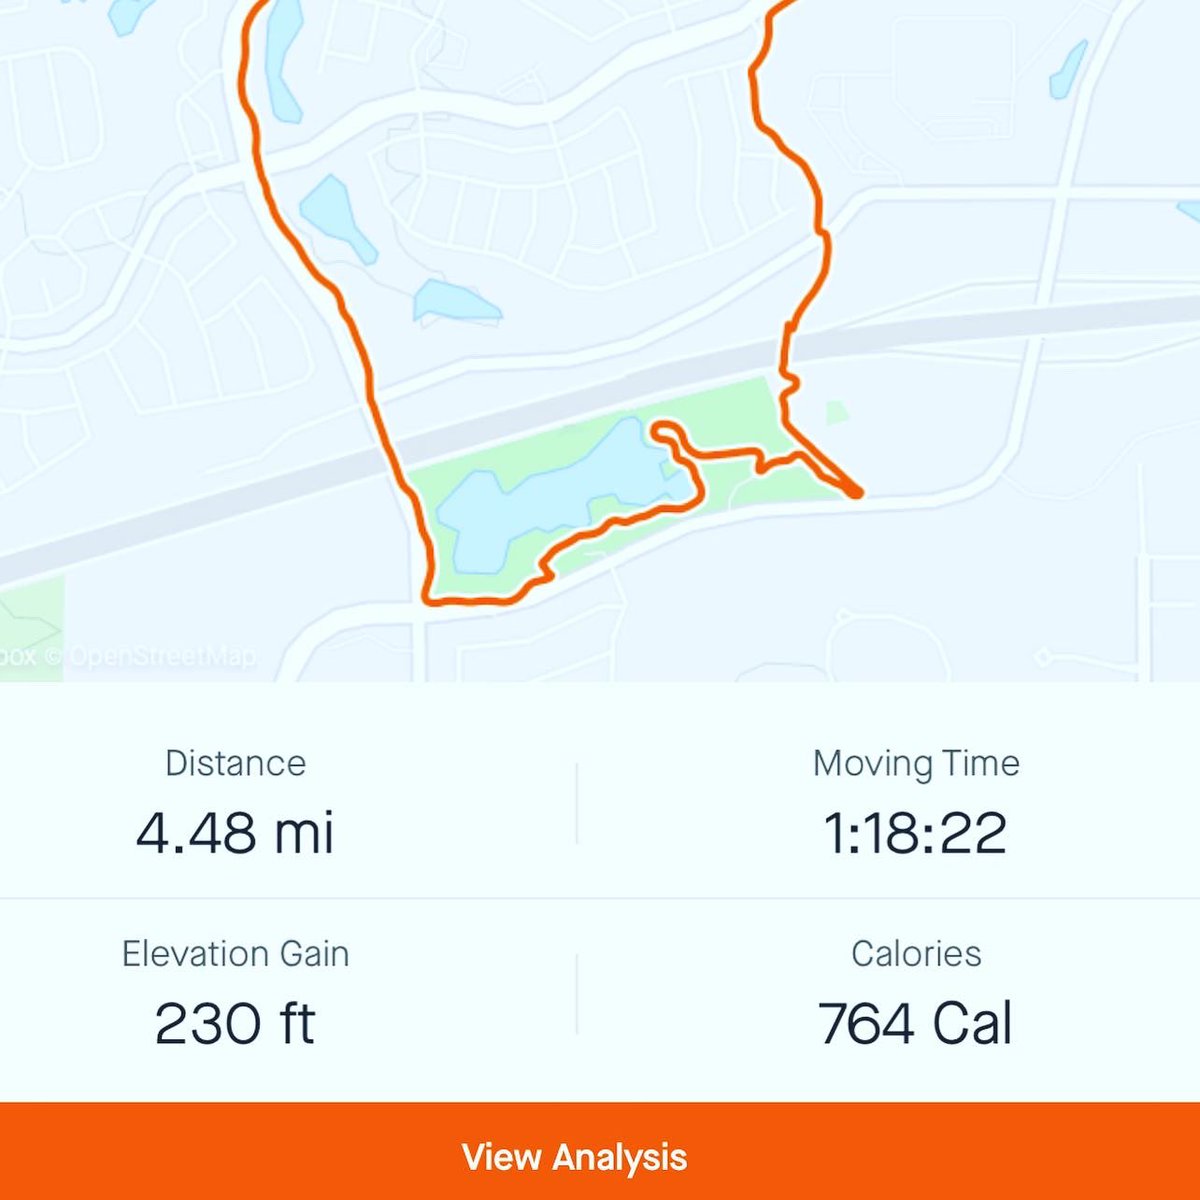 3 weeks since having 2 titanium rods and 8 screws put into my back. The first few days it was hard to even get out of the hospital bed, let alone walk. I made it home to Colorado, and today I made it out onto my usual Run route, but just to walk. #IsItMay2024Yet #IndyCar #Indy500